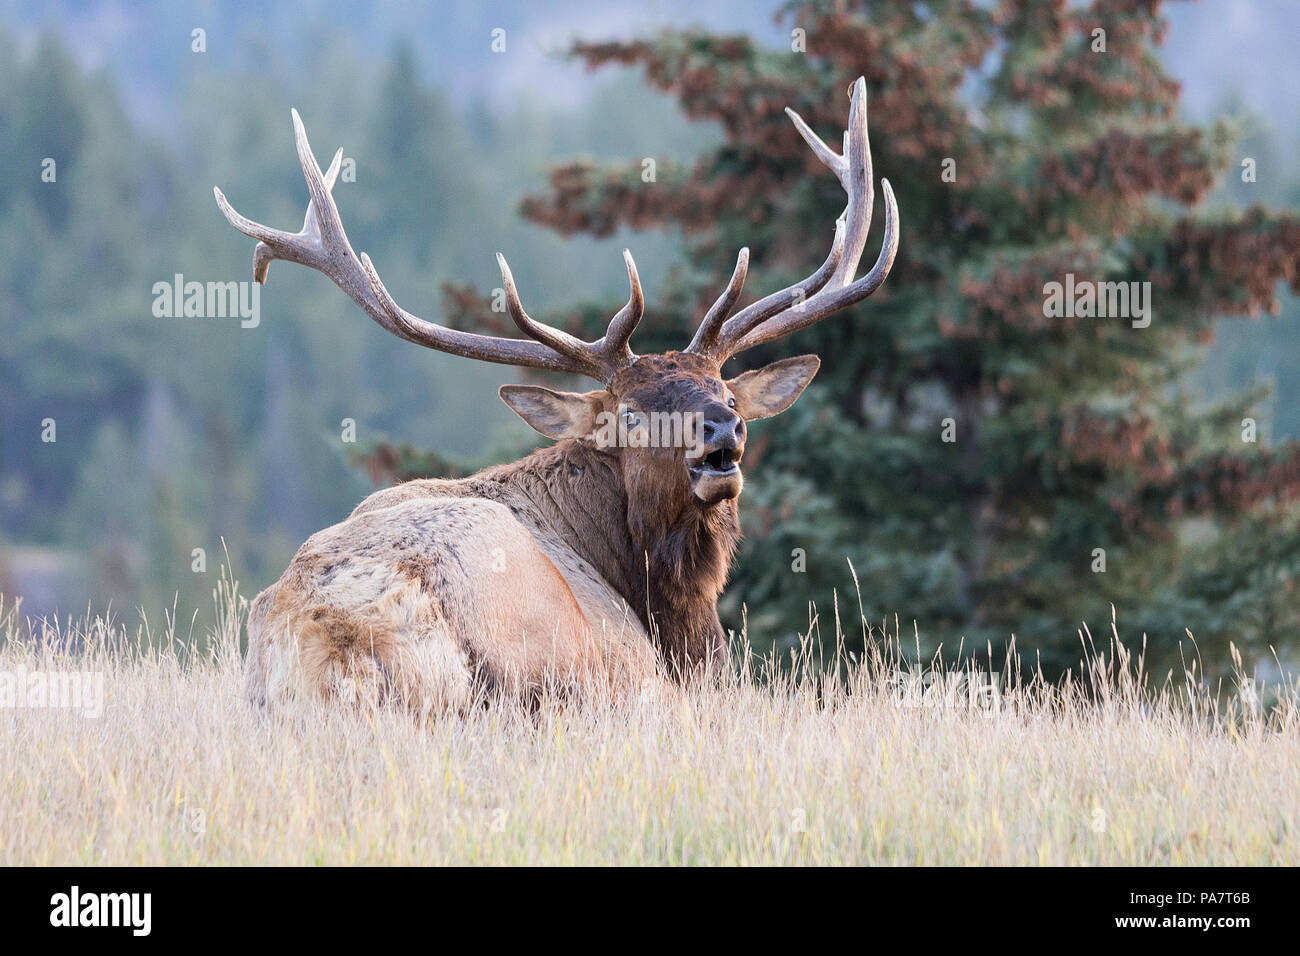 A majestic big bull laying down calling out Stock Photo